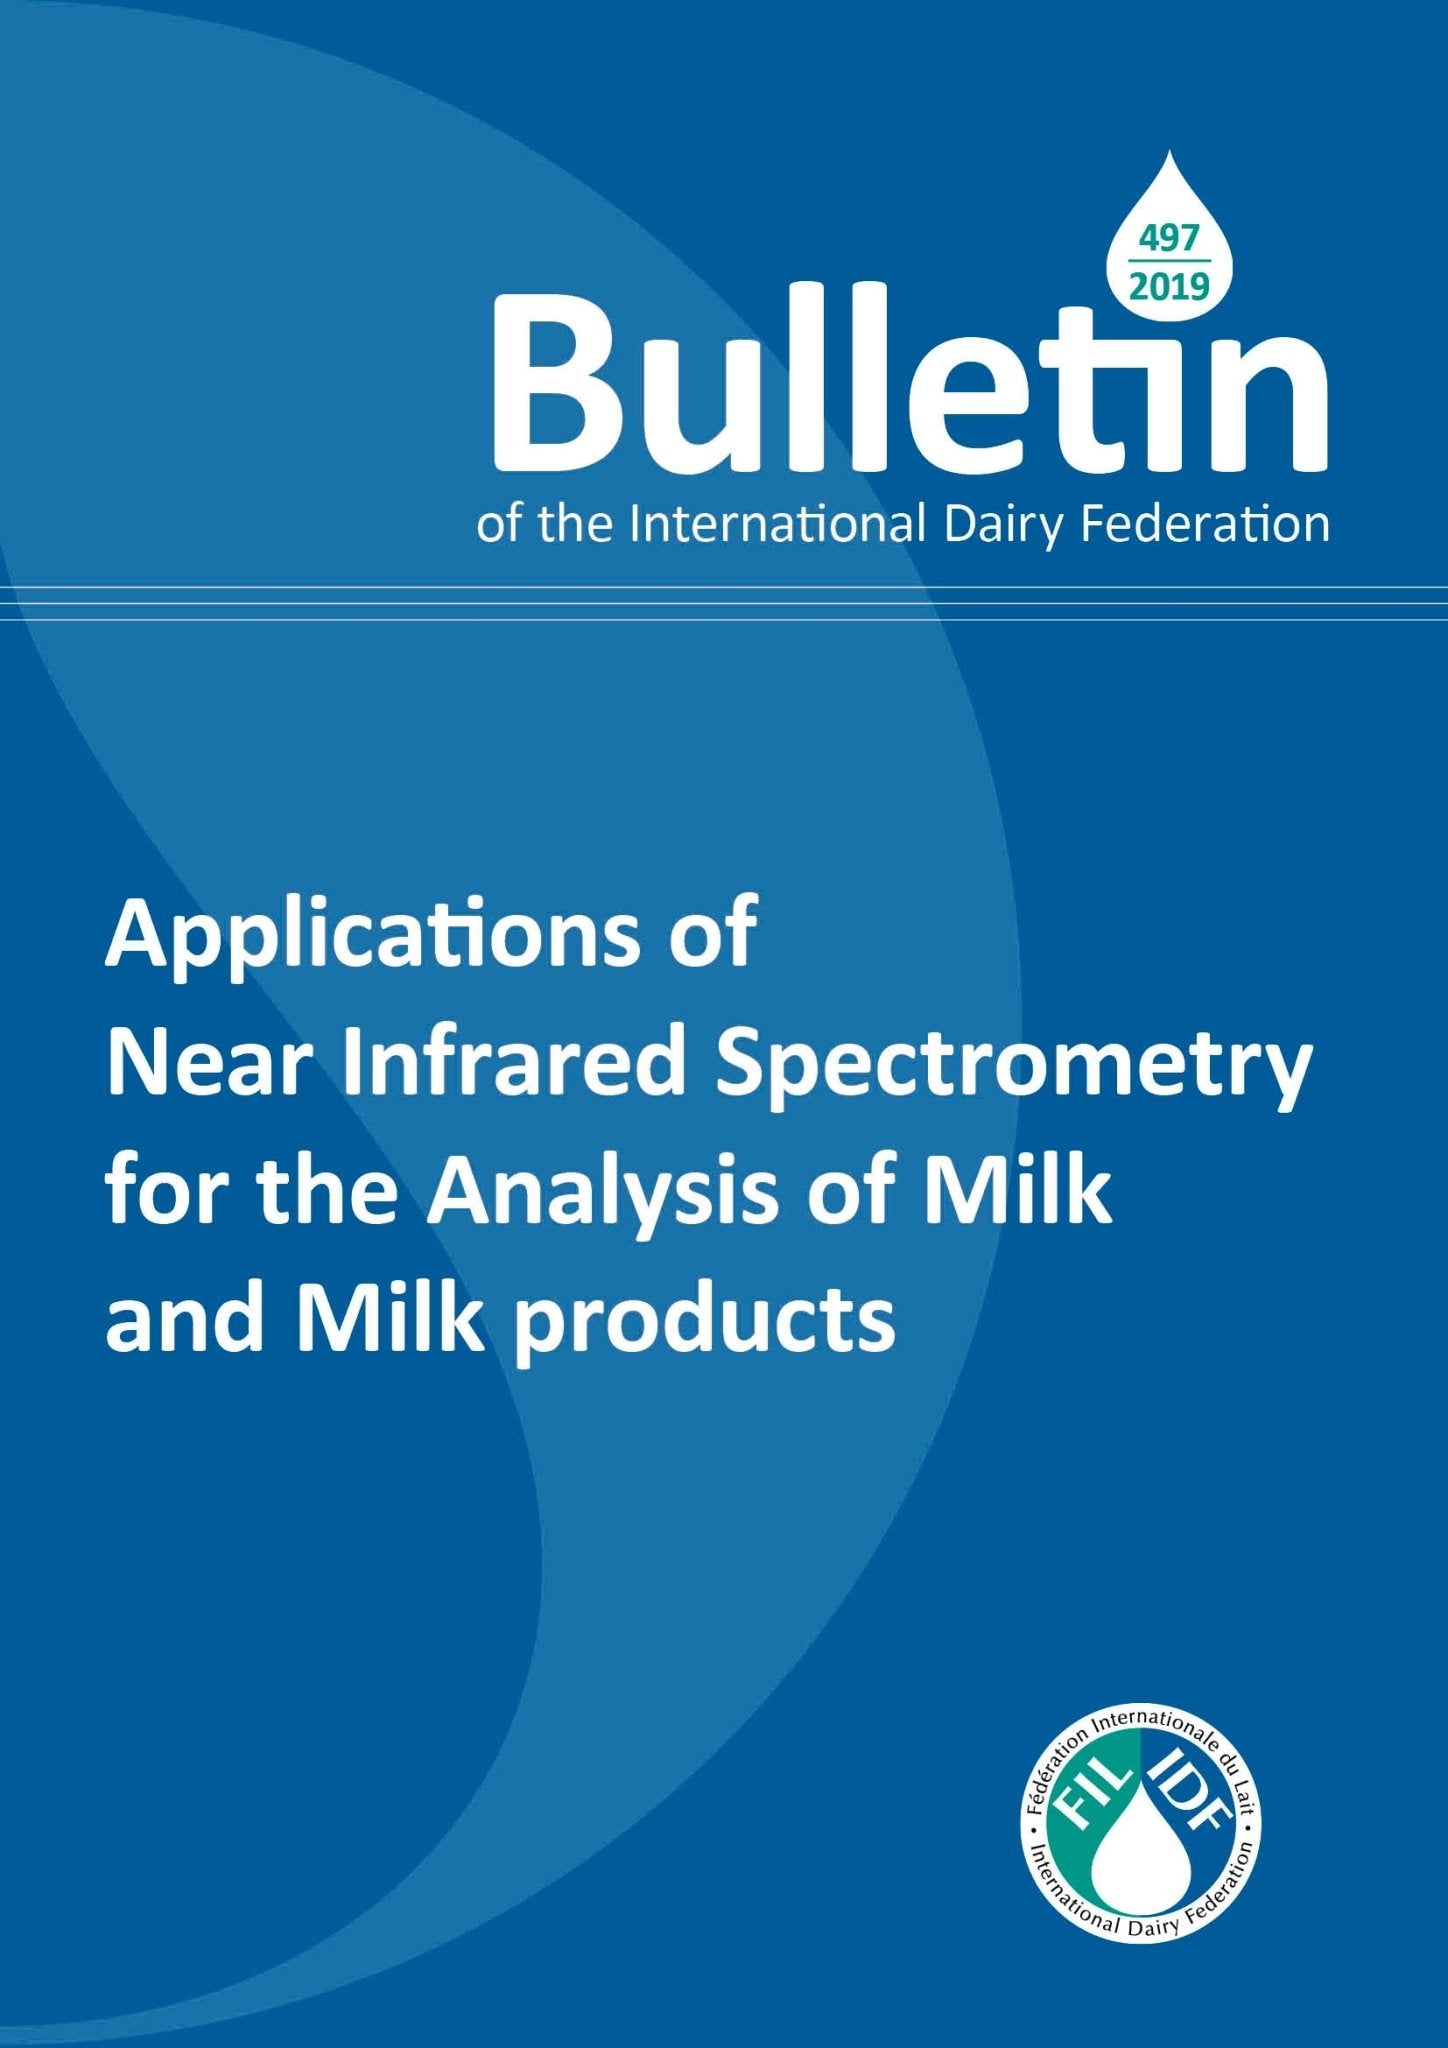 Bulletin of the IDF N° 497/2019: Applications of Near Infrared Spectrometry for the Analysis of Milk and Milk products - FIL-IDF